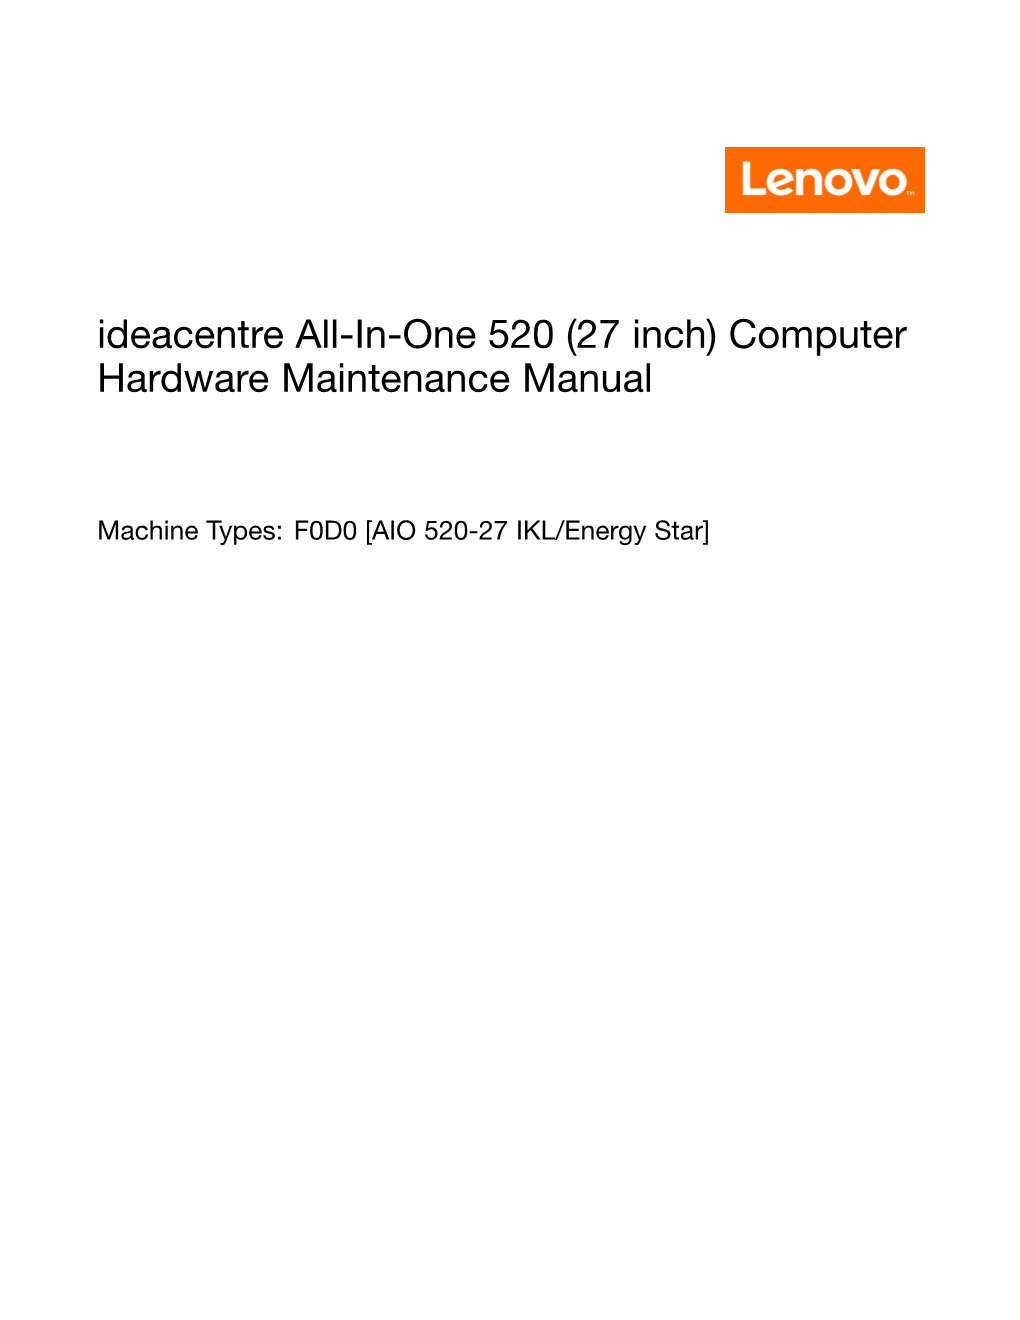 Ideacentre All-In-One 520 (27 Inch) Computer Hardware Maintenance Manual